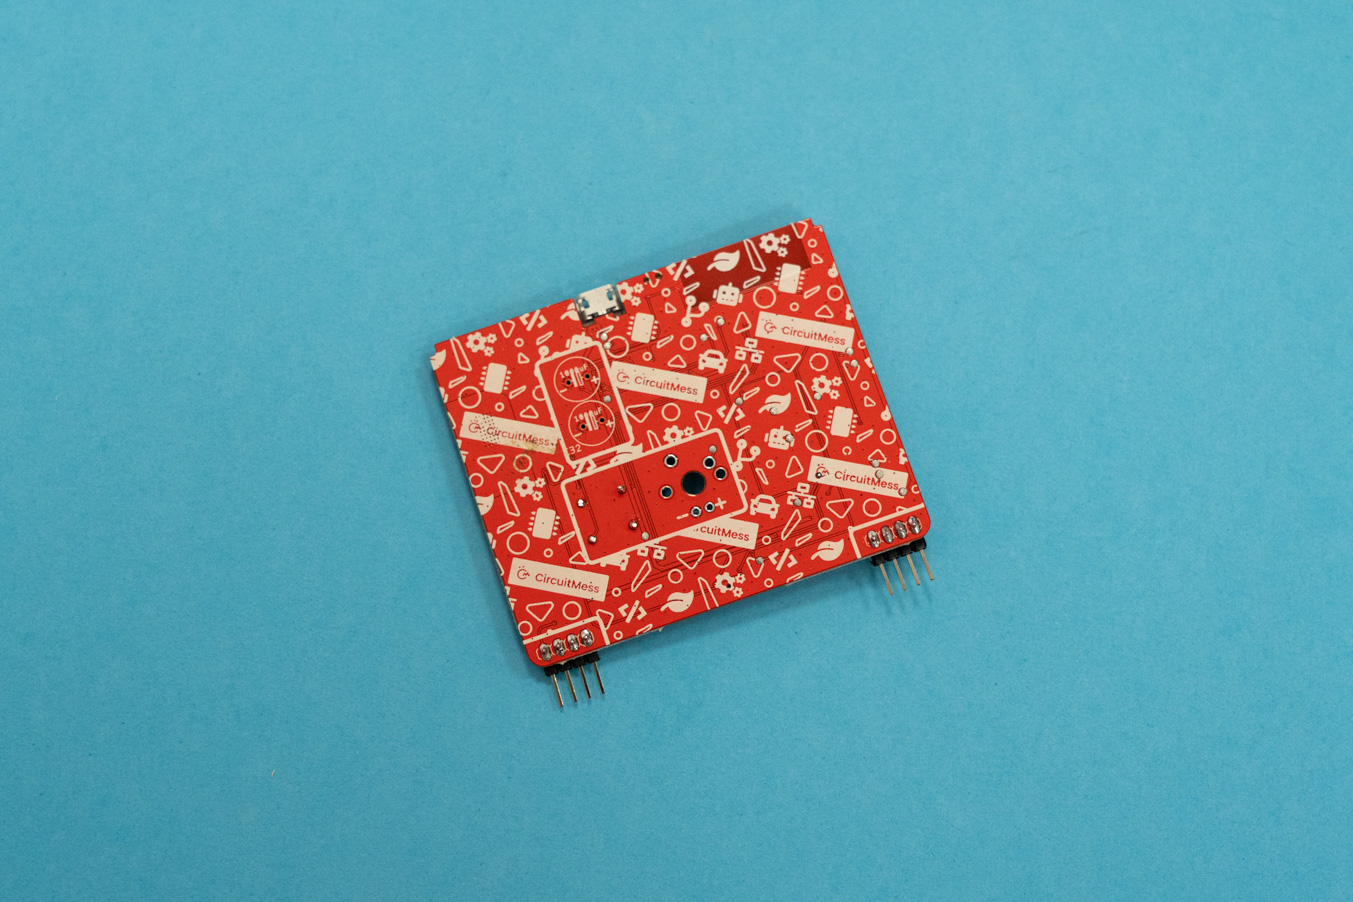 Main circuit board from the back